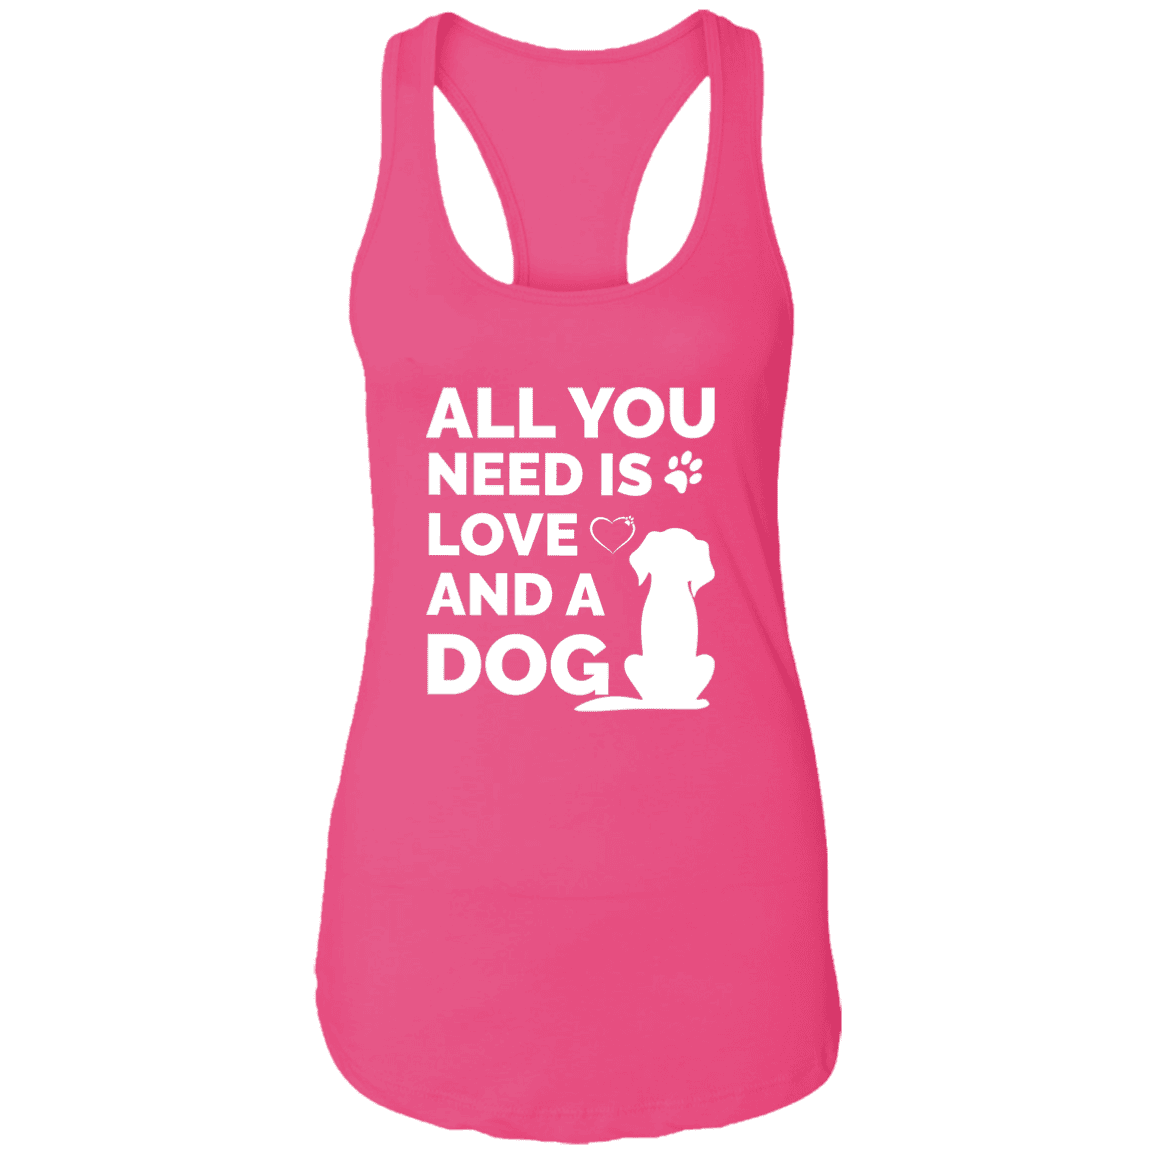 All You Need Is Love And A Dog - Ladies Racer Back Tank.